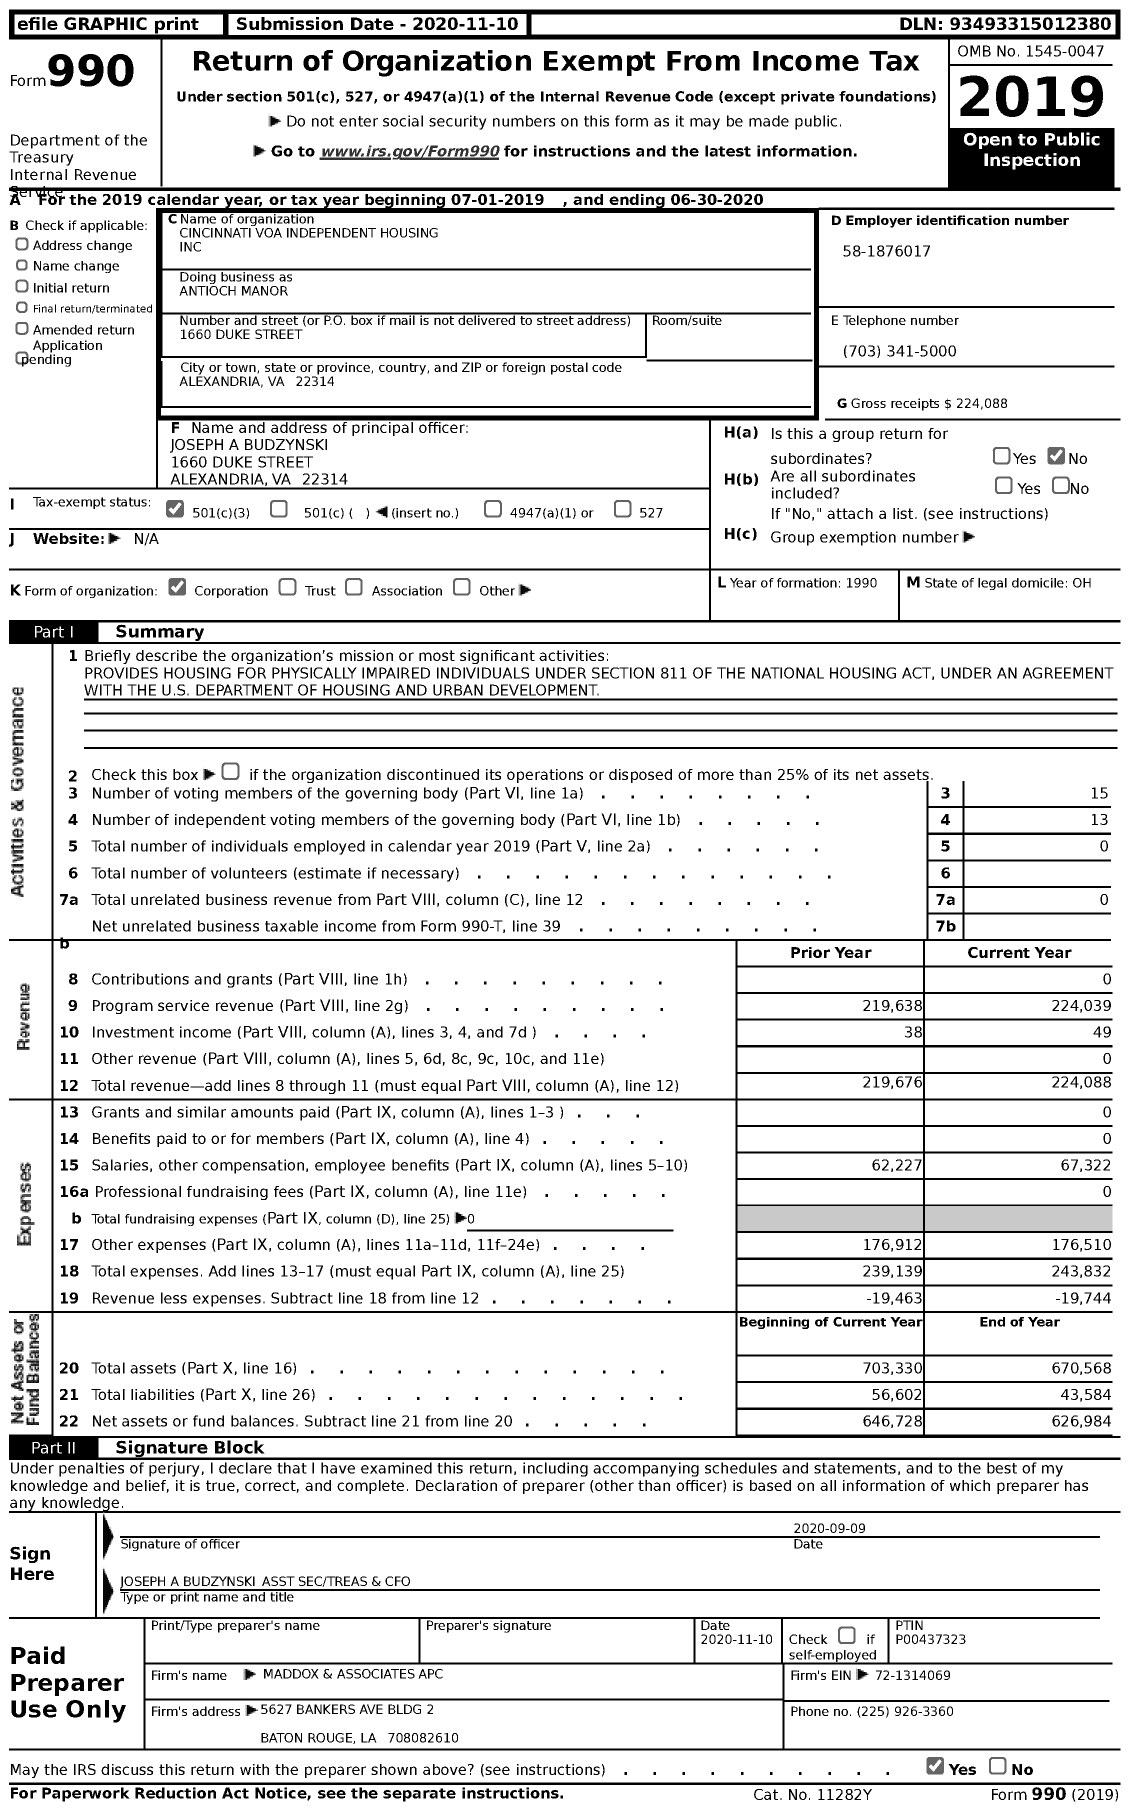 Image of first page of 2019 Form 990 for Volunteers of America - Cincinnati VOA Independent Housing